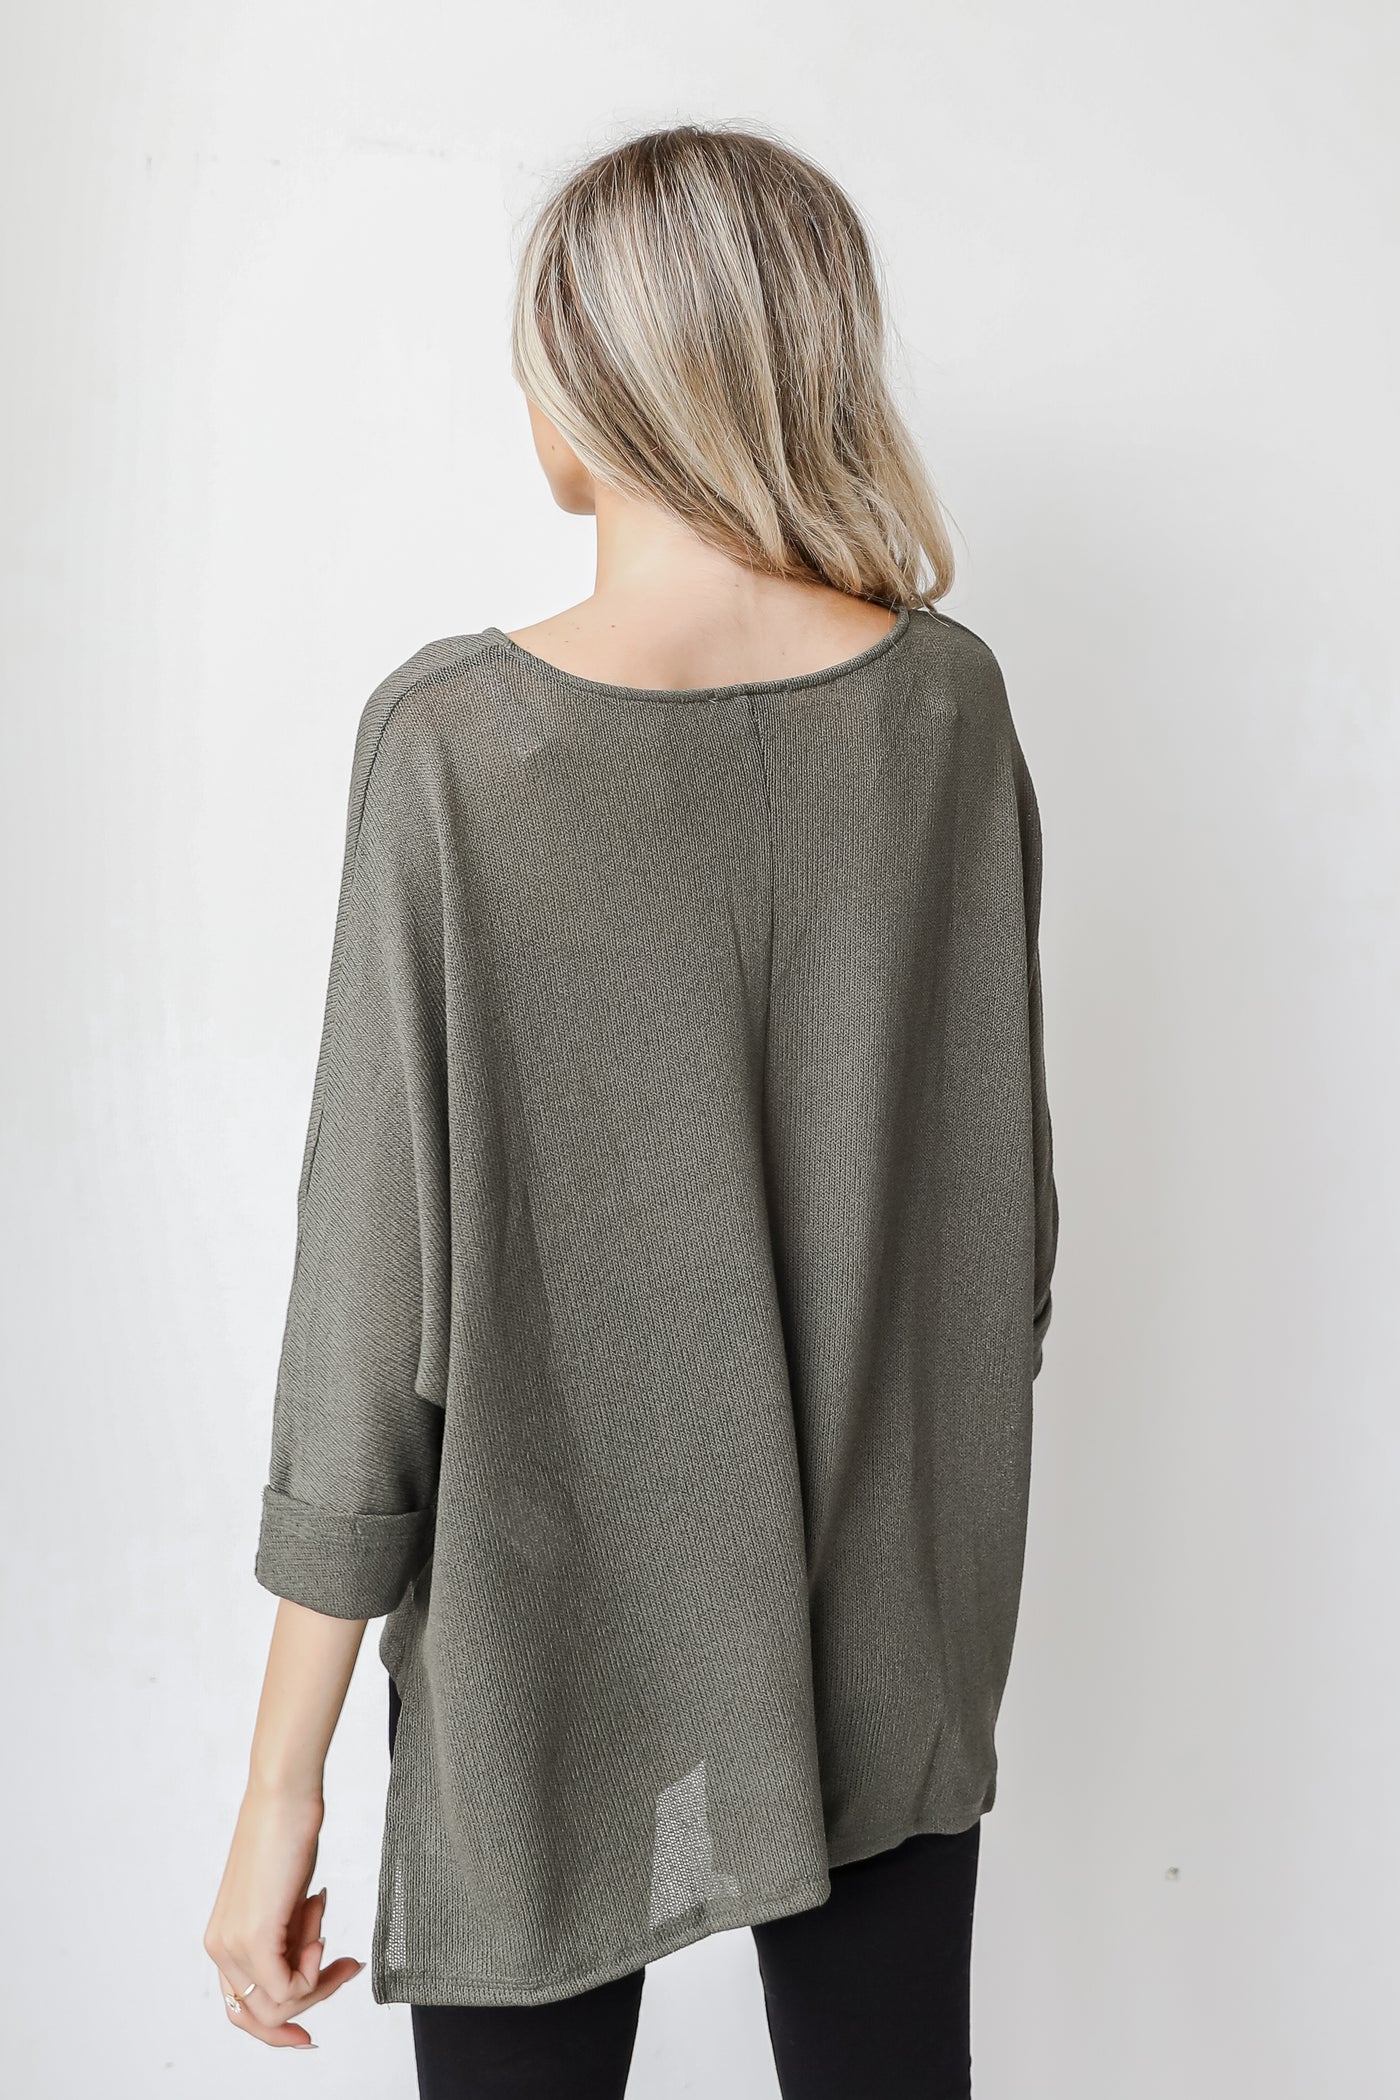 Lightweight Knit Top in olive back view